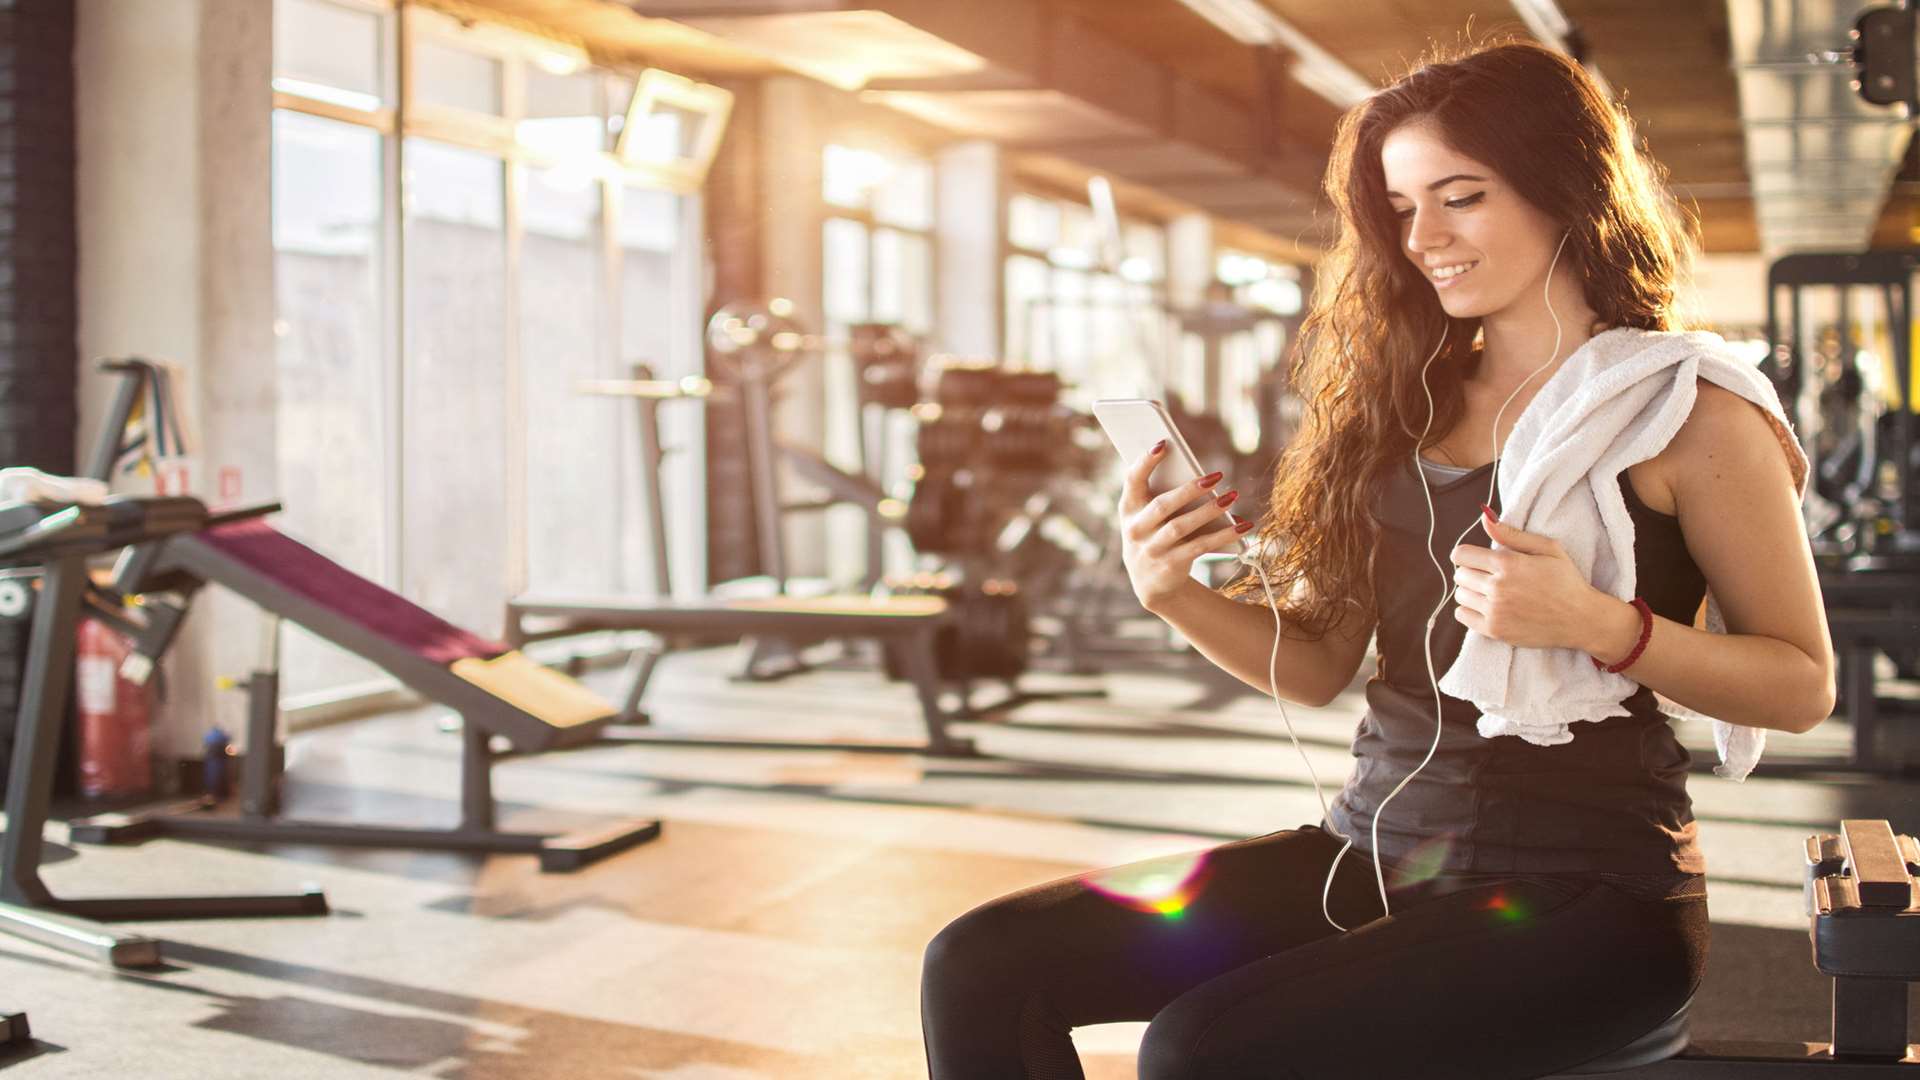 Get in shape this year with the help of your phone